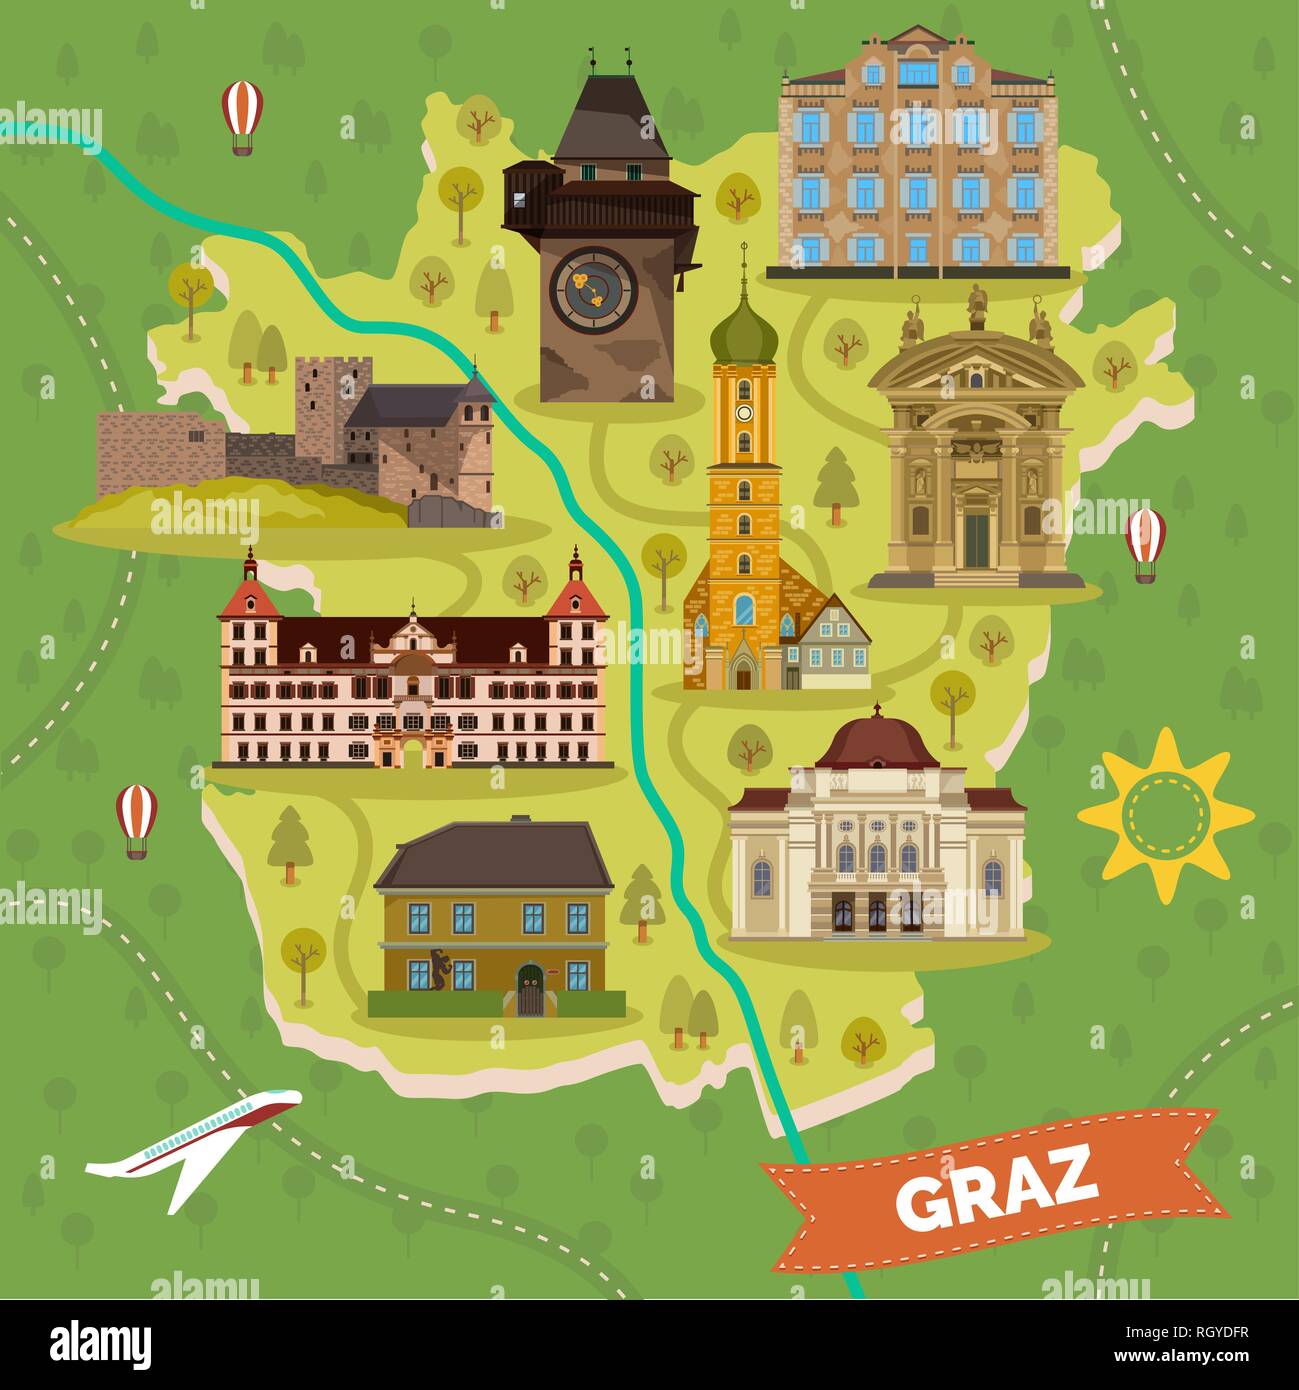 Graz town map with sightseeing landmarks Stock Vector